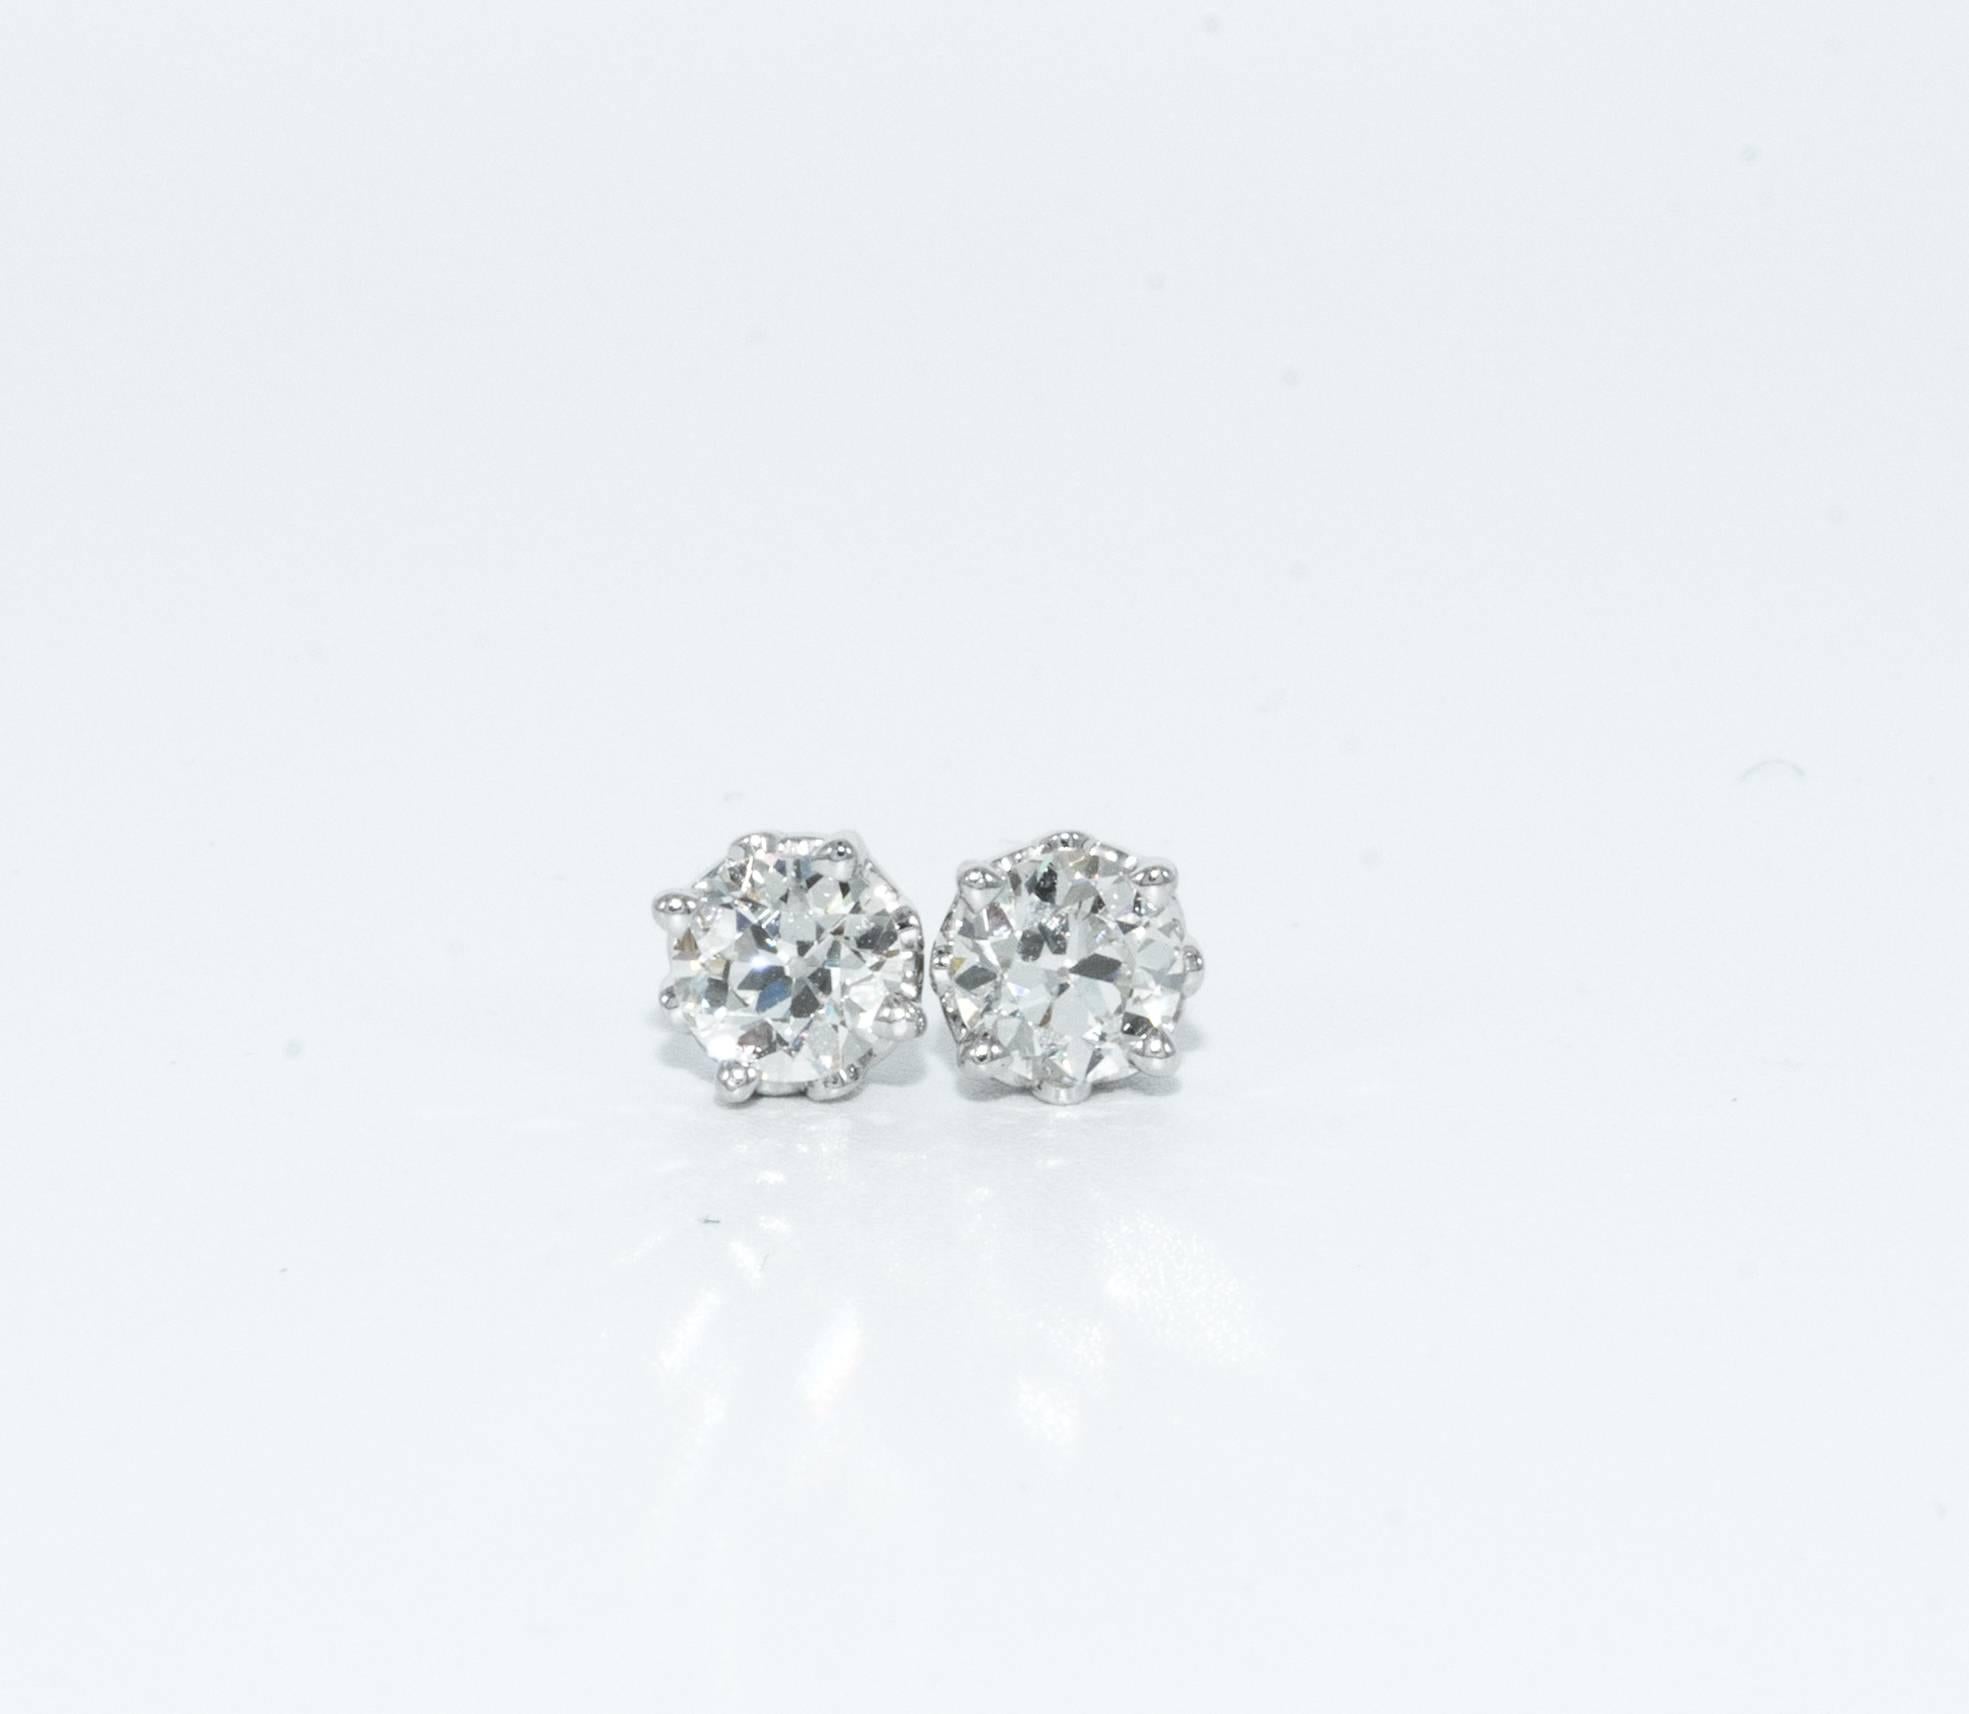 1.15 Carats Old European cut Diamond stud earrings
Color is J-K , Clarity is SI1
Both Diamonds are certified by American Gem Society Laboratory ( AGS #104079007009, & 104079007010)
5.3 MM Diameter, beautifully cut and perfectly matched pair 
Set in